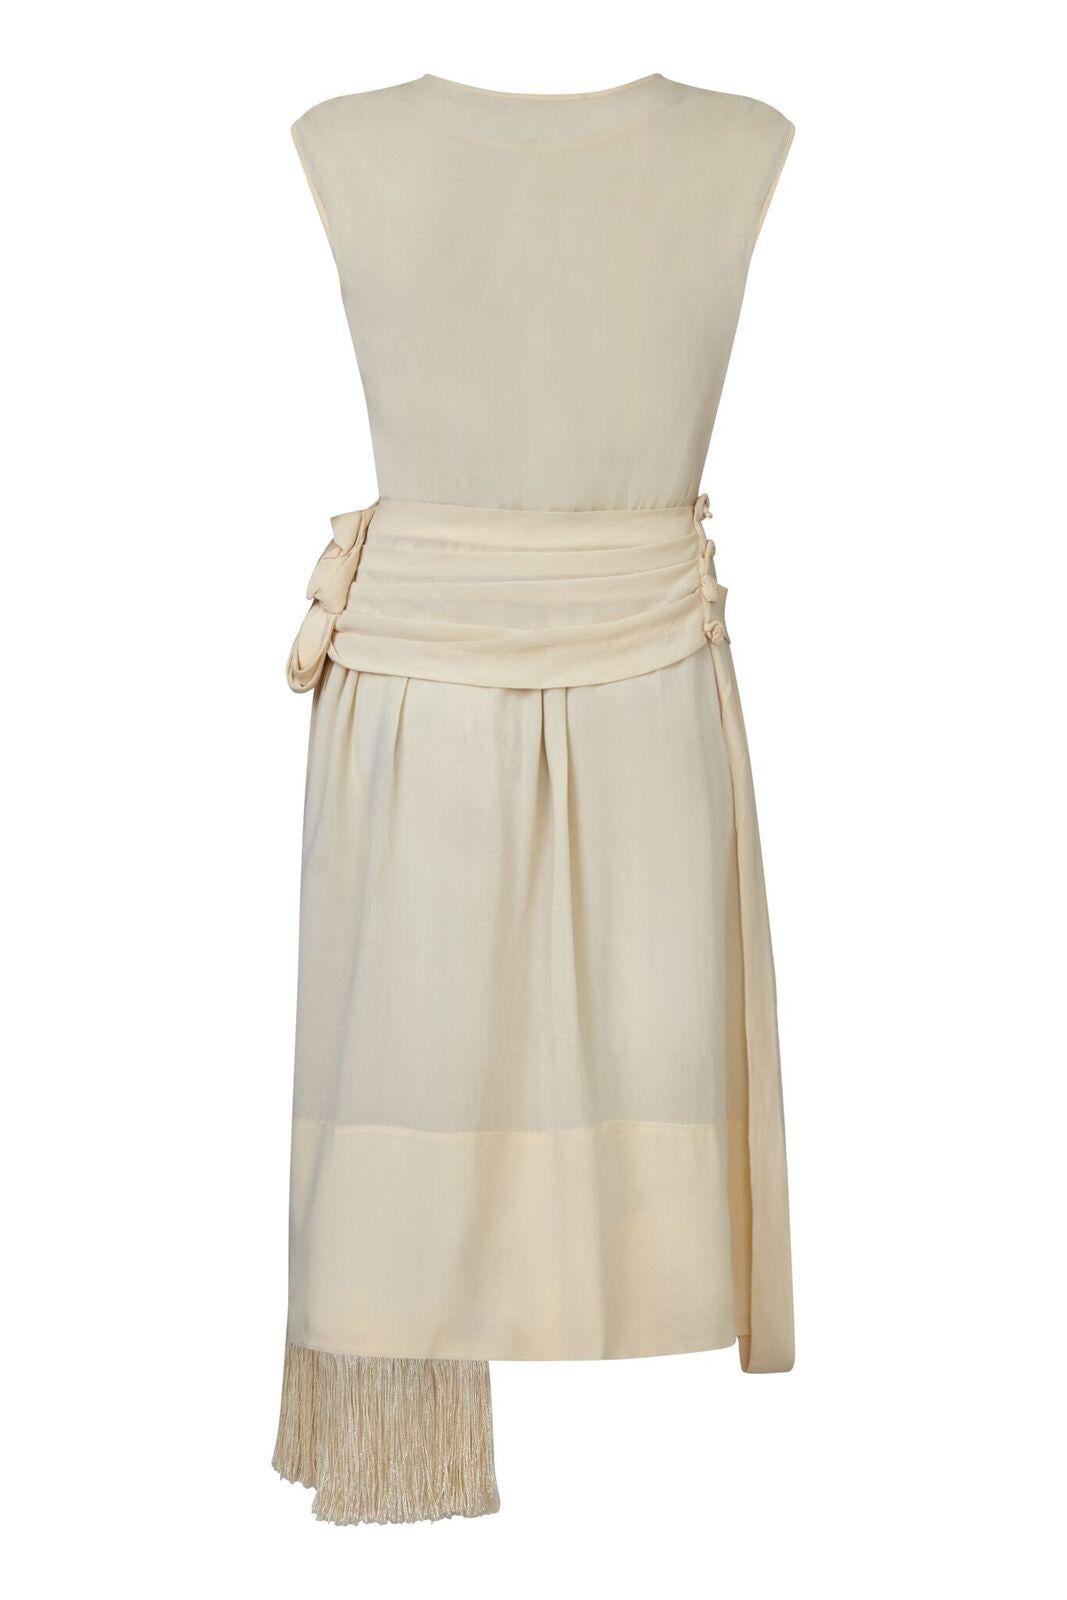 This exquisite 1920s Flapper style dress is in excellent vintage condition and of remarkable construction. The soft cream silk crepe fabric has been expertly tailored to create an elegant drop waist with a shift style overlay which gathers to the